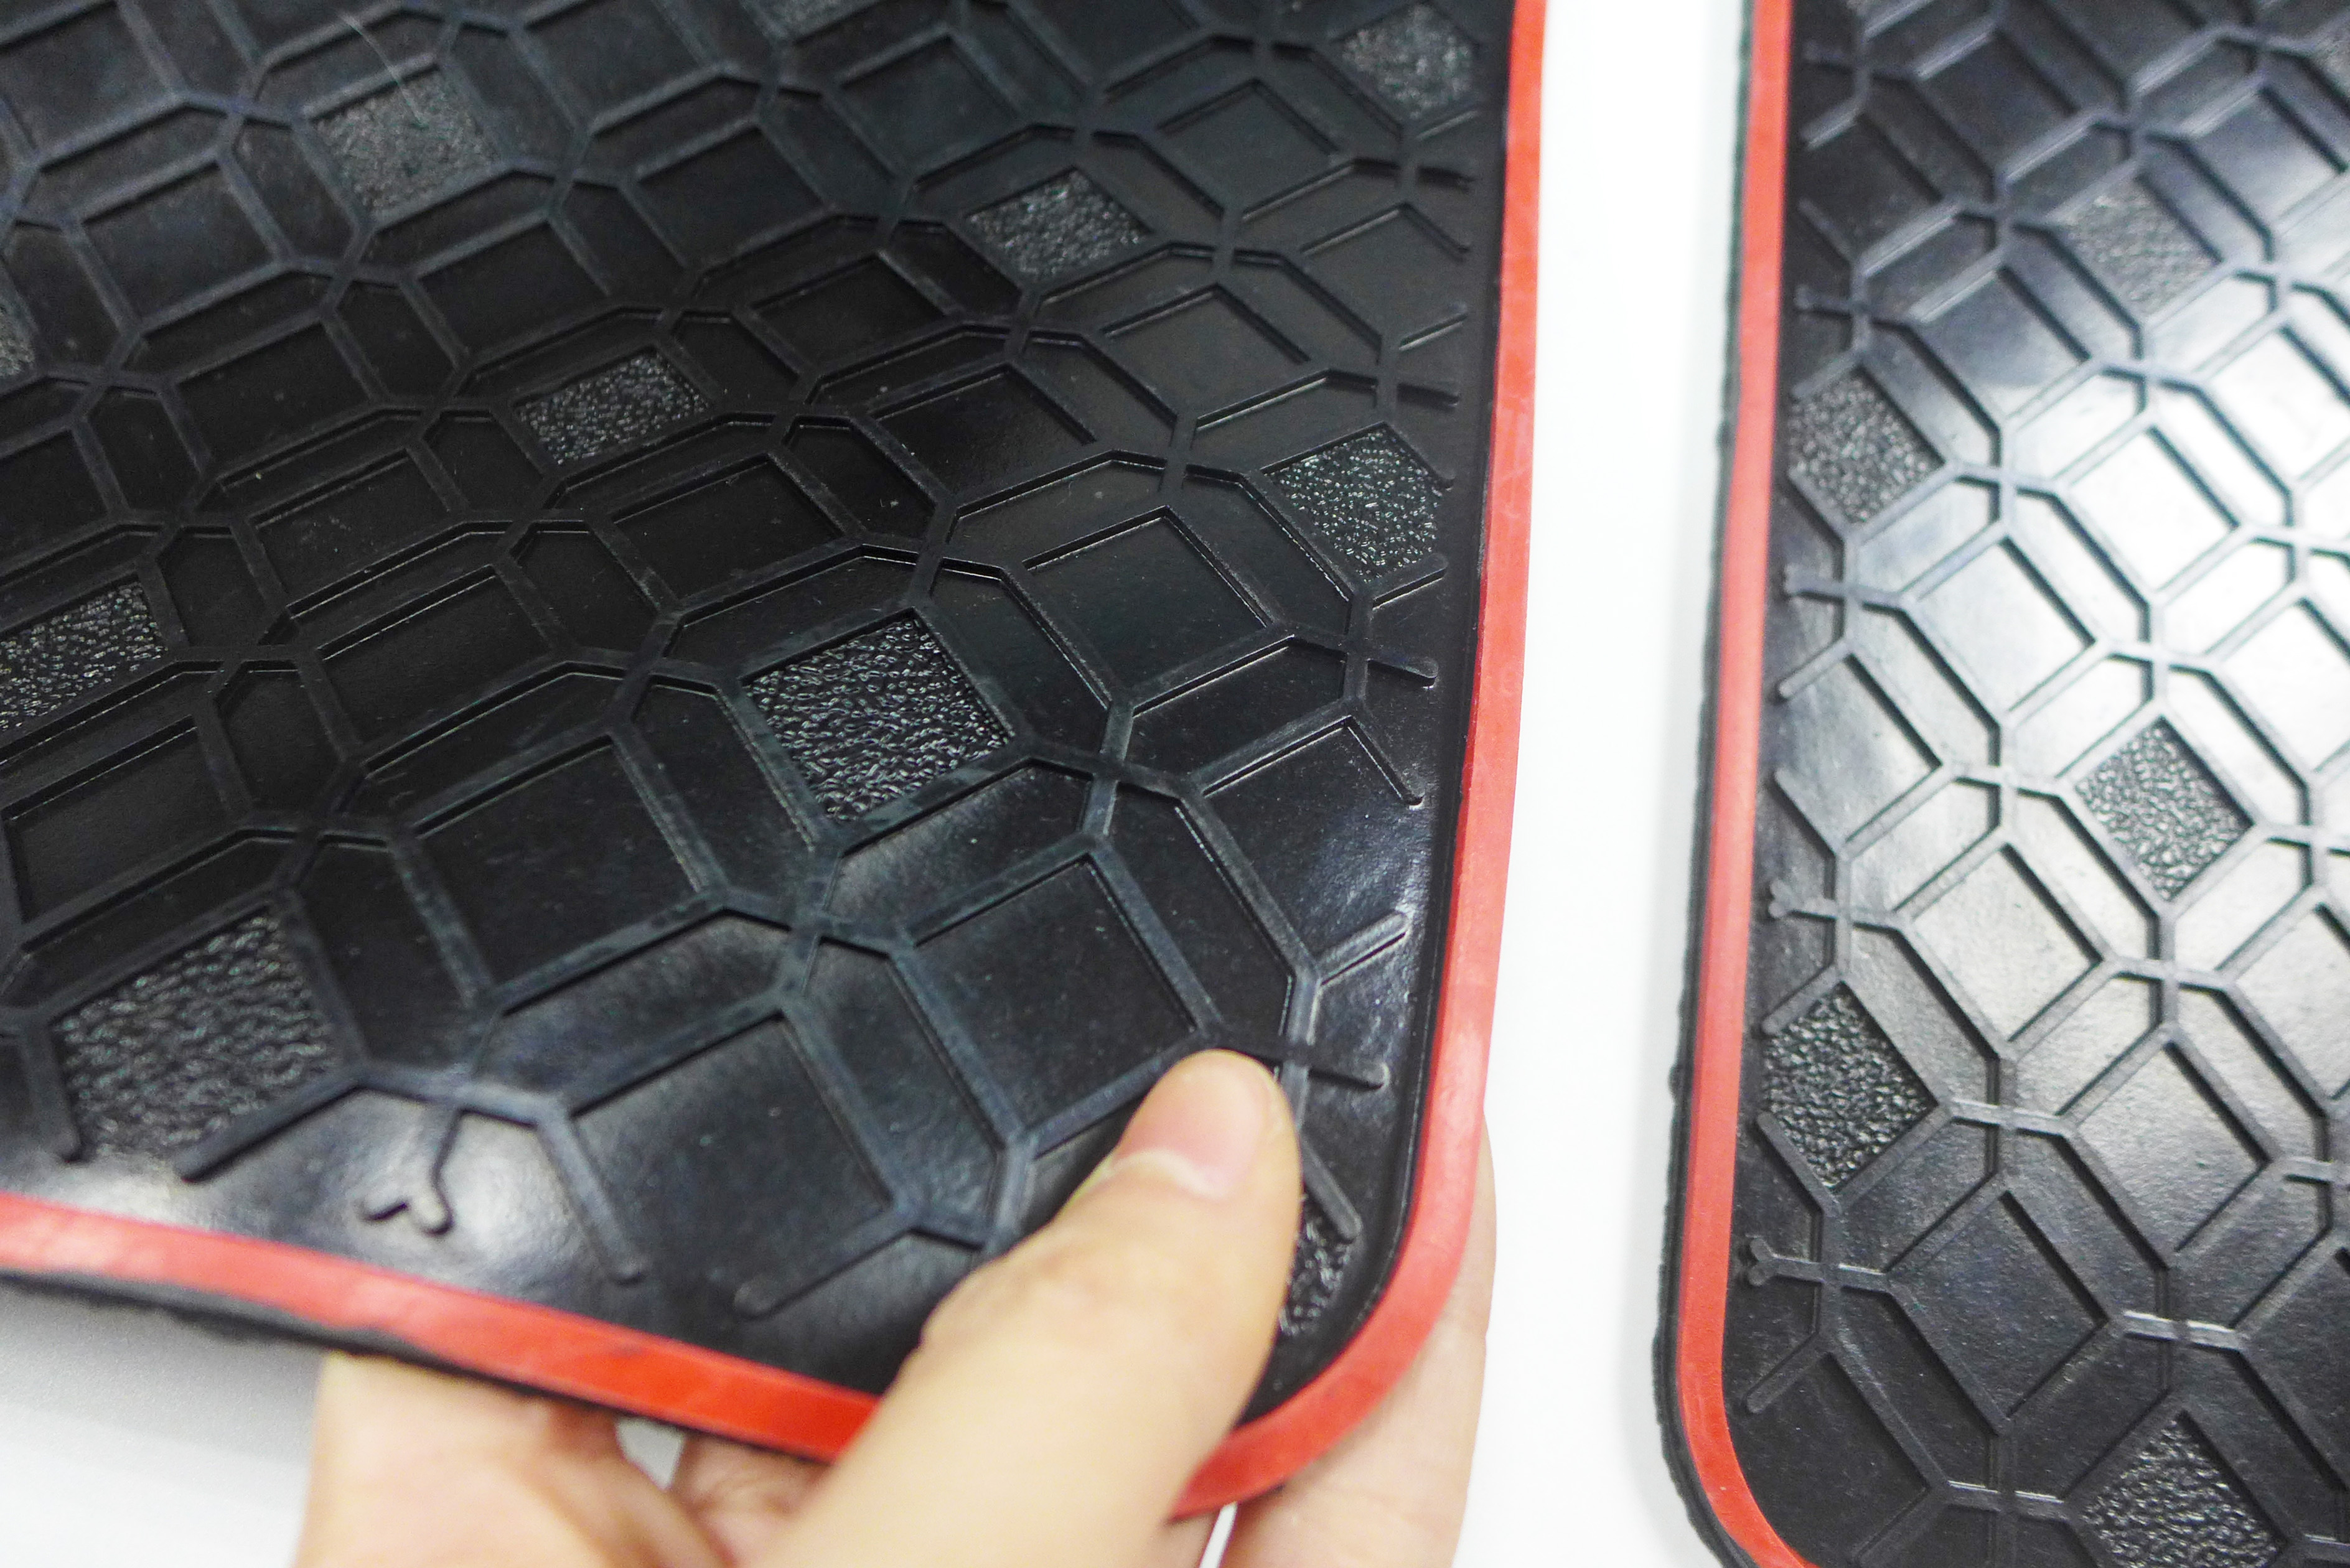 It took me a while to find one as they are not common unlike…”. Universal Size Rubber Car Floor Mat Set - Haiheng Rubber